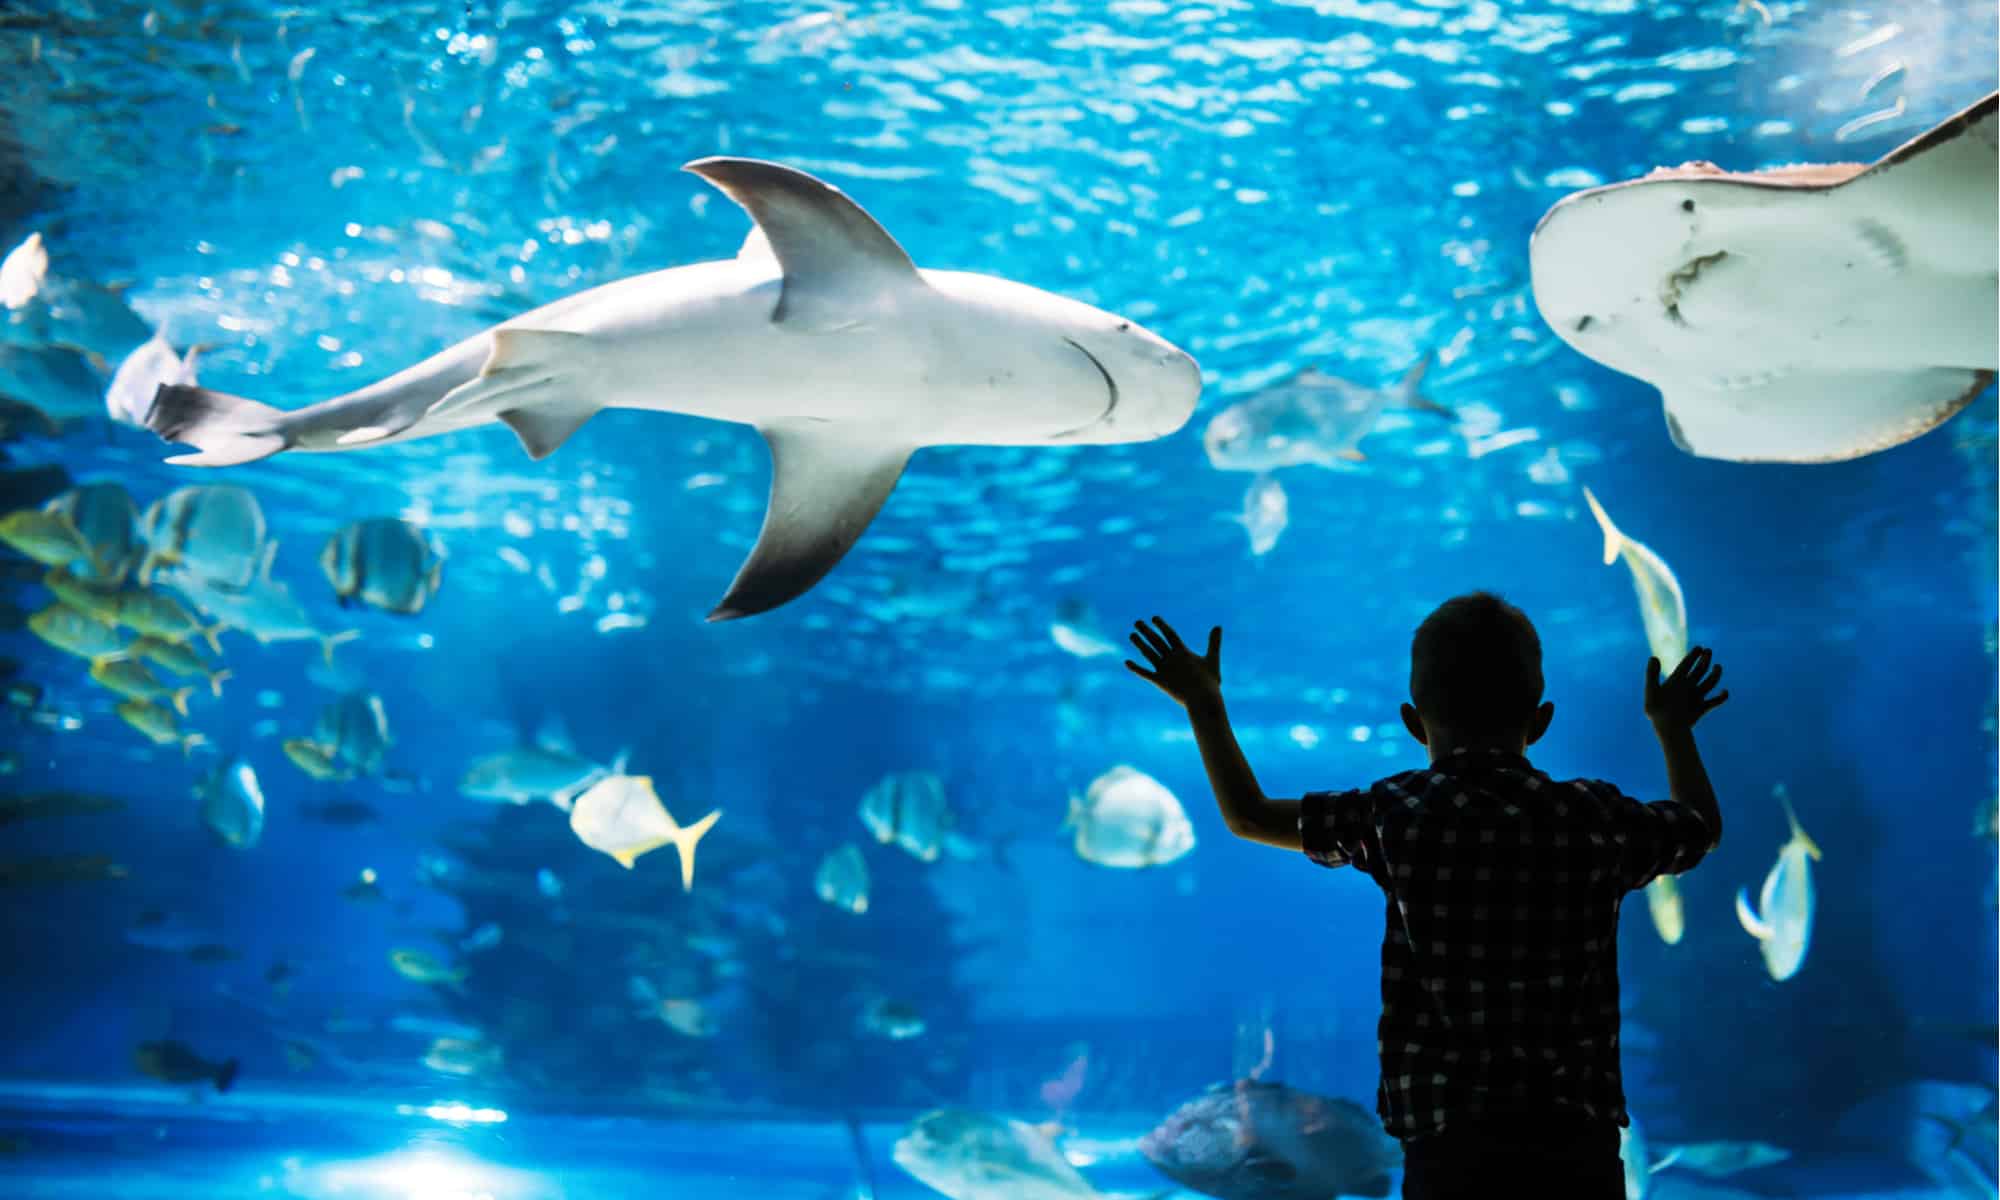 Do Any Aquariums Have Whales?. Aquariums are popular attractions for…, by  Richmond Loh